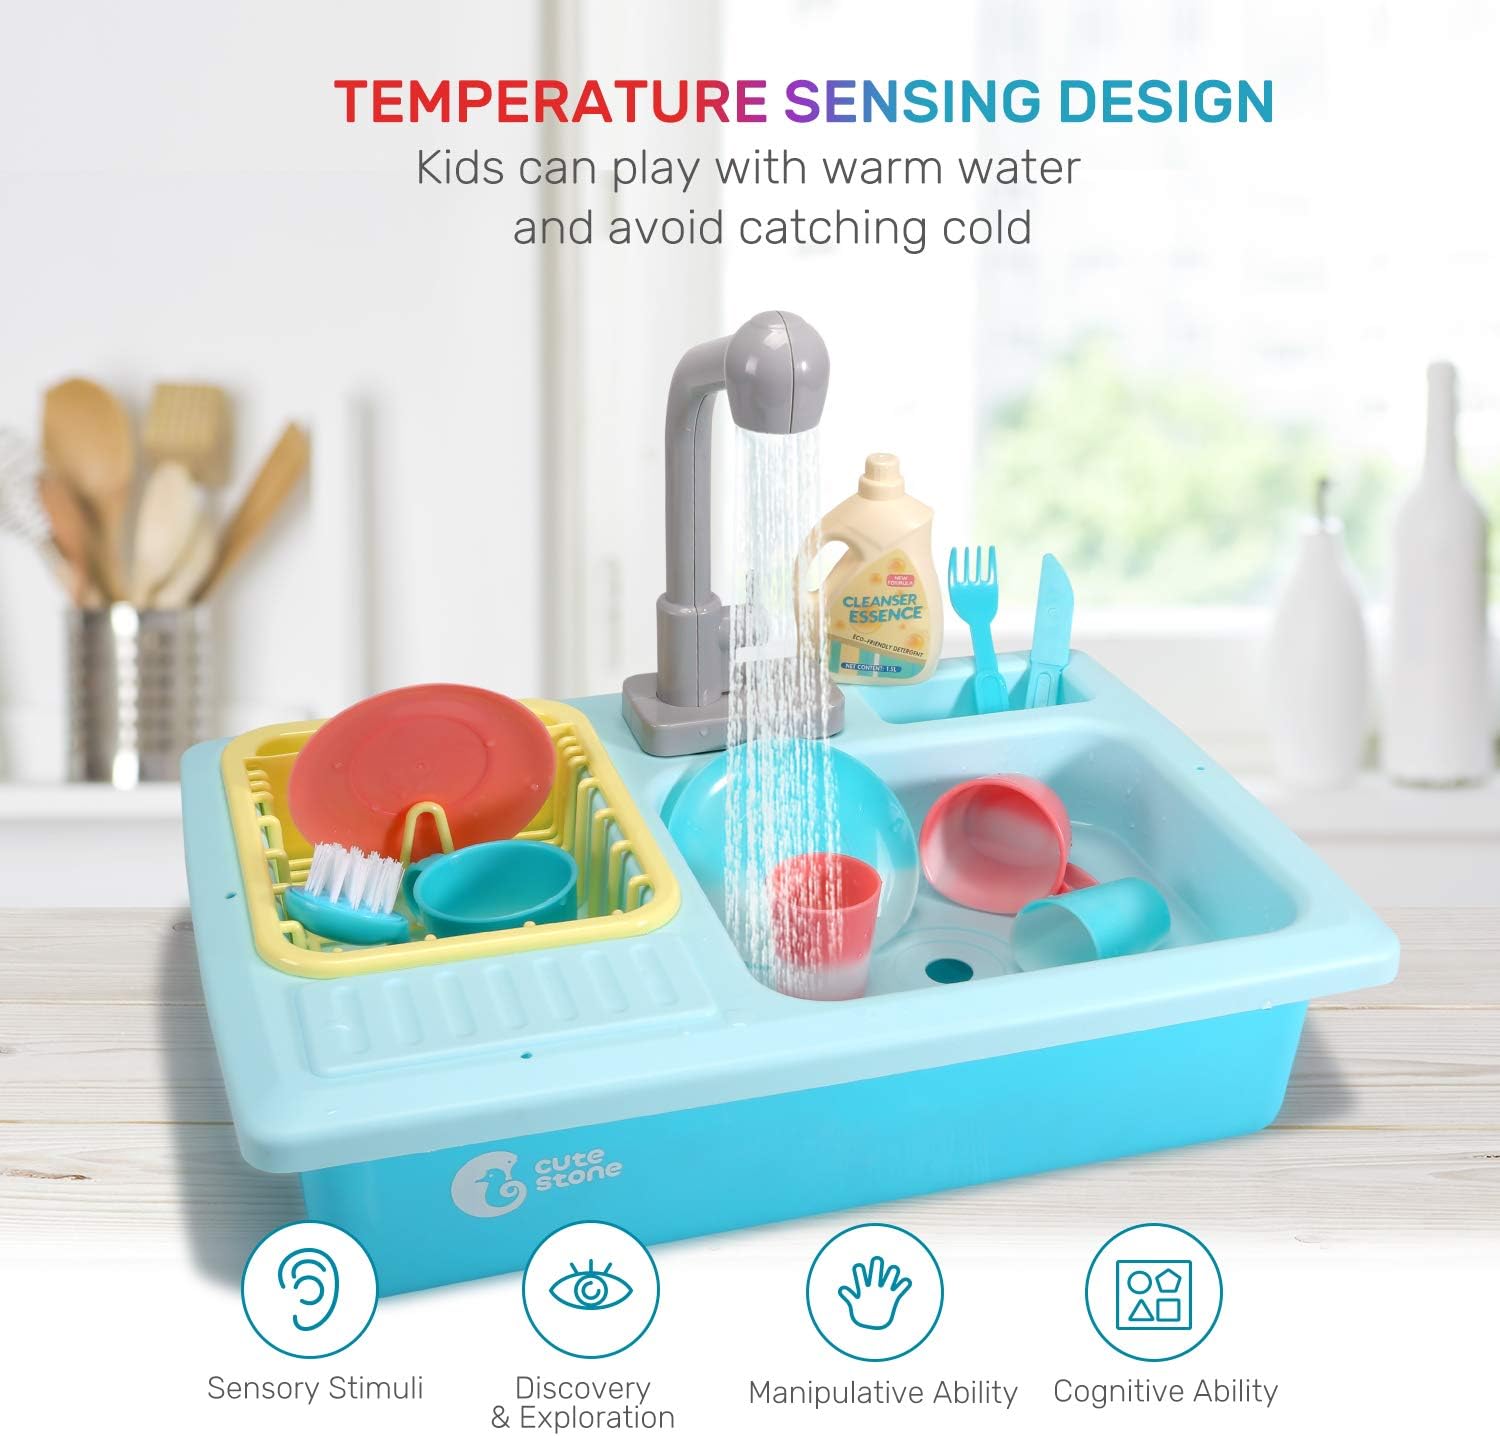 CUTE STONE Color Changing Kitchen Sink Toys, Children Heat Sensitive Electric Dishwasher Playing Toy with Running Water, Automatic Water Cycle System Play House Pretend Role Play Toys for Boys Girls